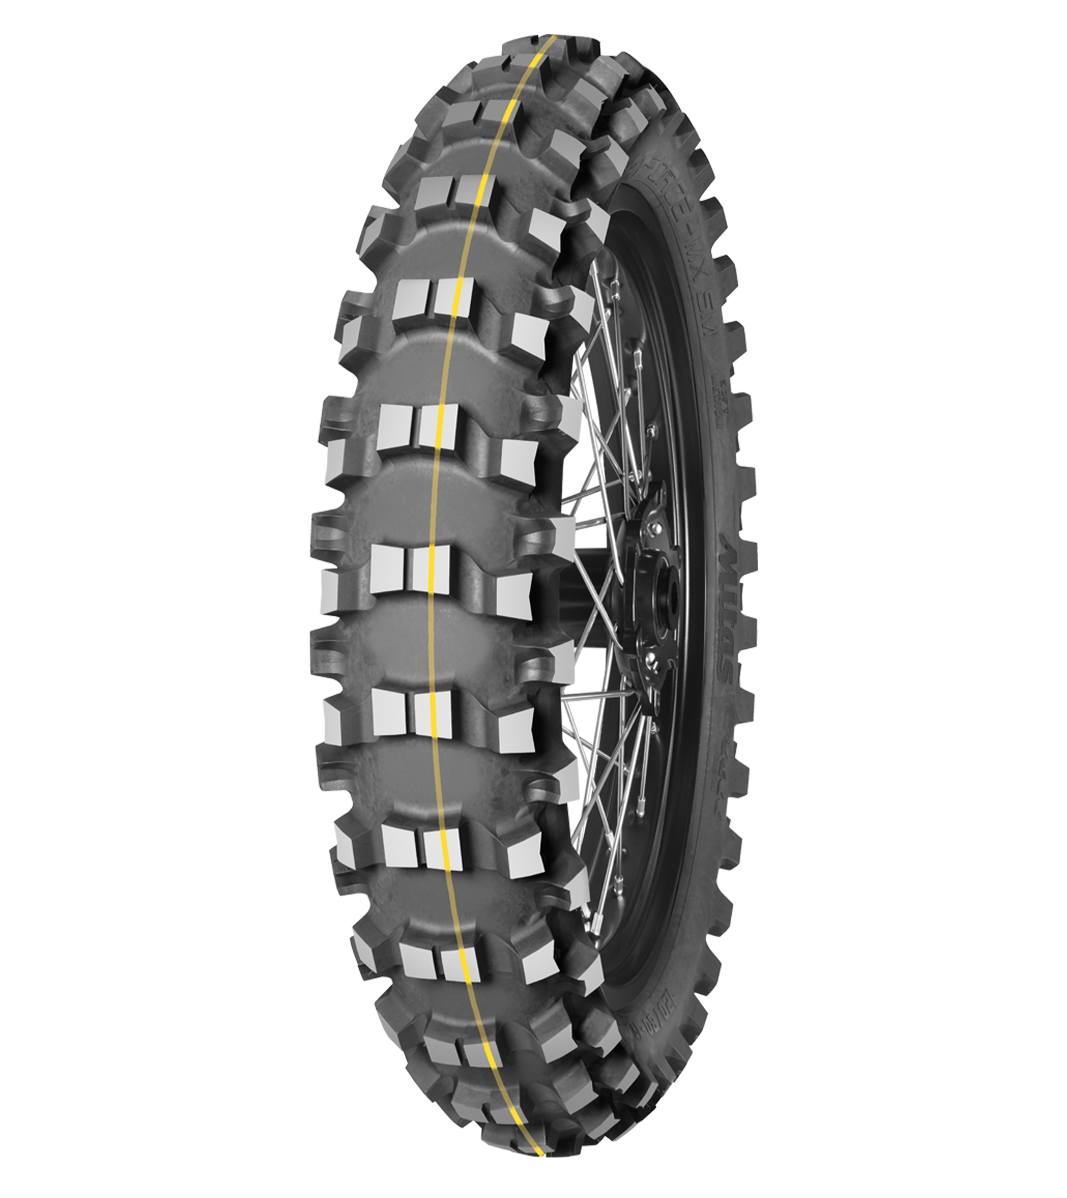 Mitas TERRA FORCE-MX SM 120/90-18 Enduro Competition Off-Road COUNTRY CROSS 65M Yellow Tube Rear Tire, 226550, 120/90-18, Enduro Competition, Off-Road, Rear, Terra Force, Terra Force-MX SM, Trail, Tires - Imported and distributed in North & South America by Lindeco Genuine Powersports - Premier Powersports Equipment and Accessories for Motorcycle Enthusiasts, Professional Riders and Dealers.